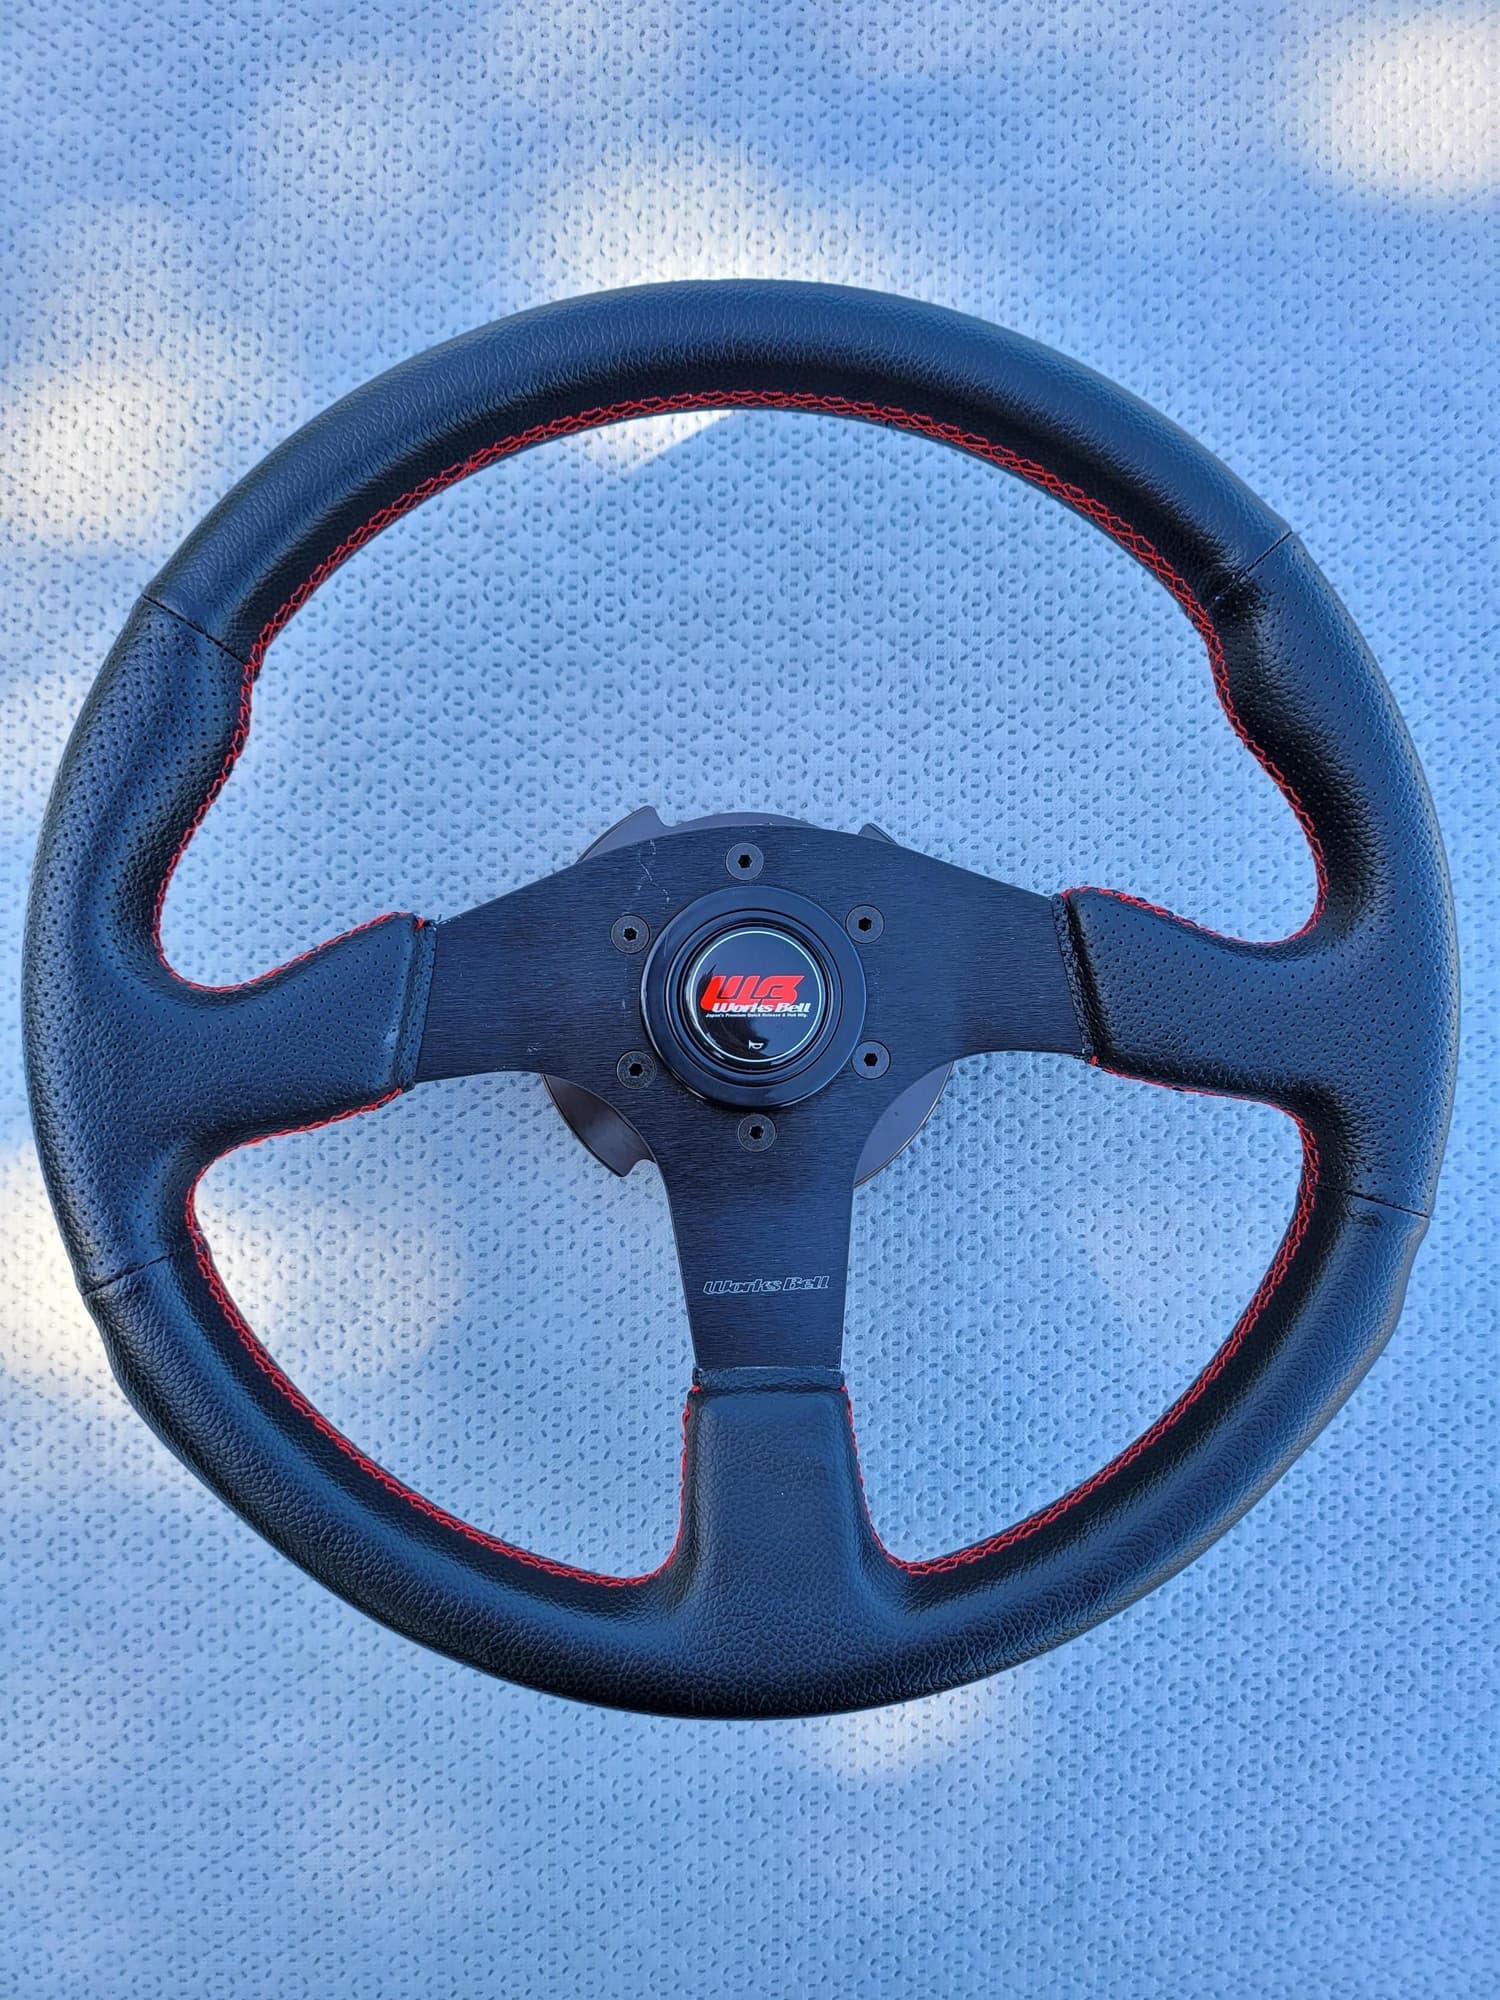 Interior/Upholstery - Norcal - Works Bell Type III 350mm Steering Wheel - Used - 0  All Models - San Mateo, CA 94401, United States